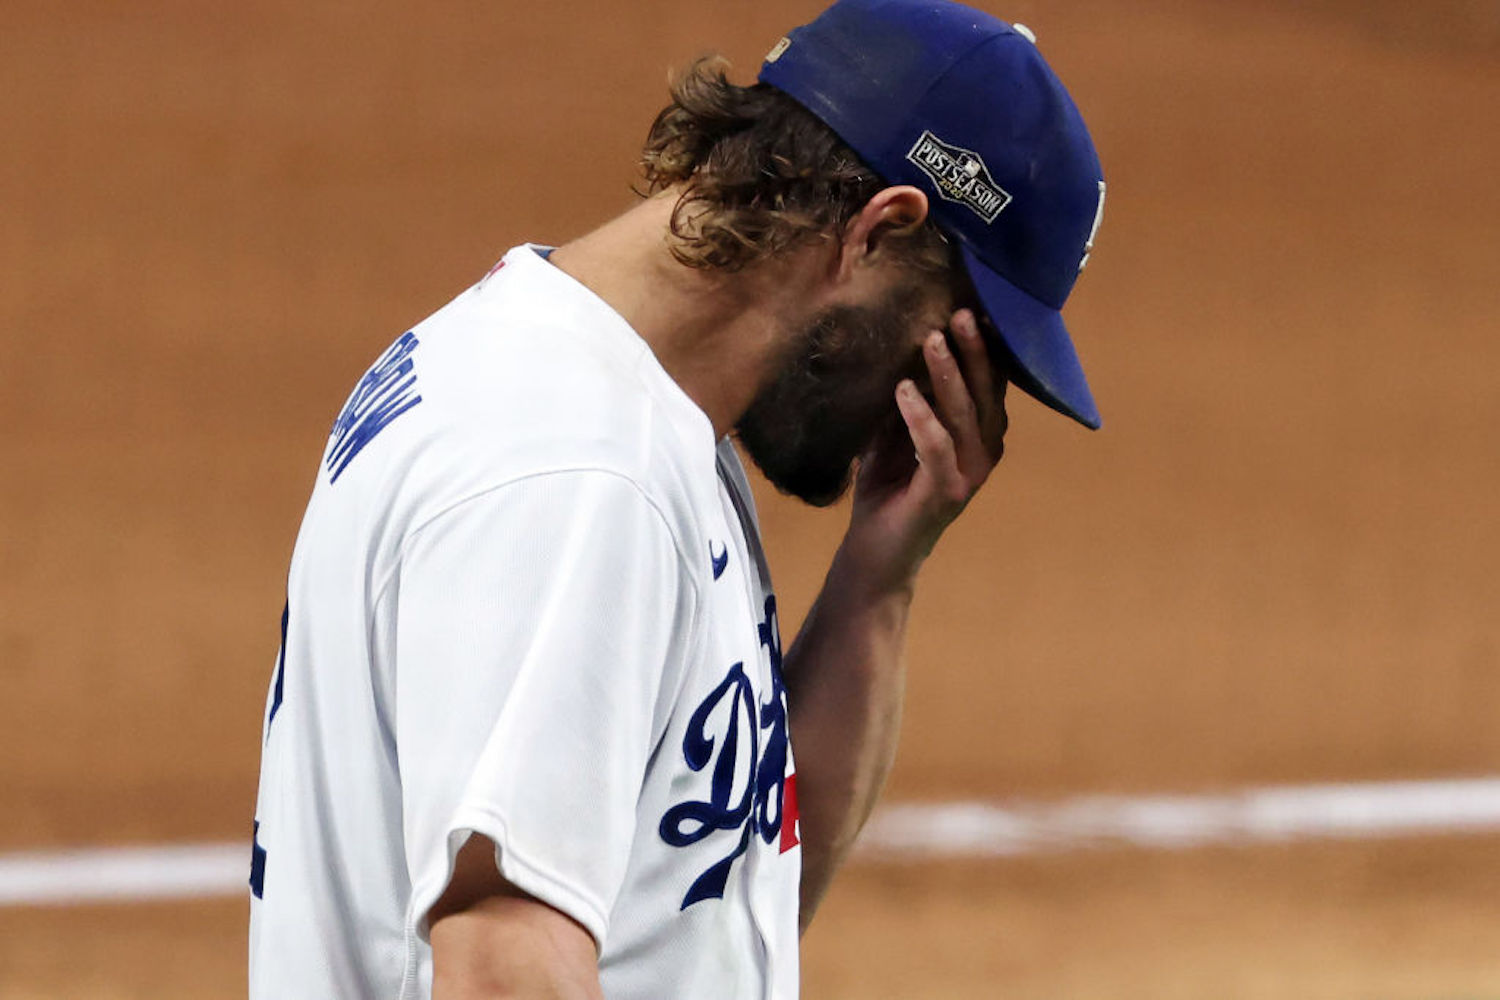 Clayton Kershaw is a generational talent, but he's earned the label of playoff choke artist over the years. Is it warranted or too harsh?